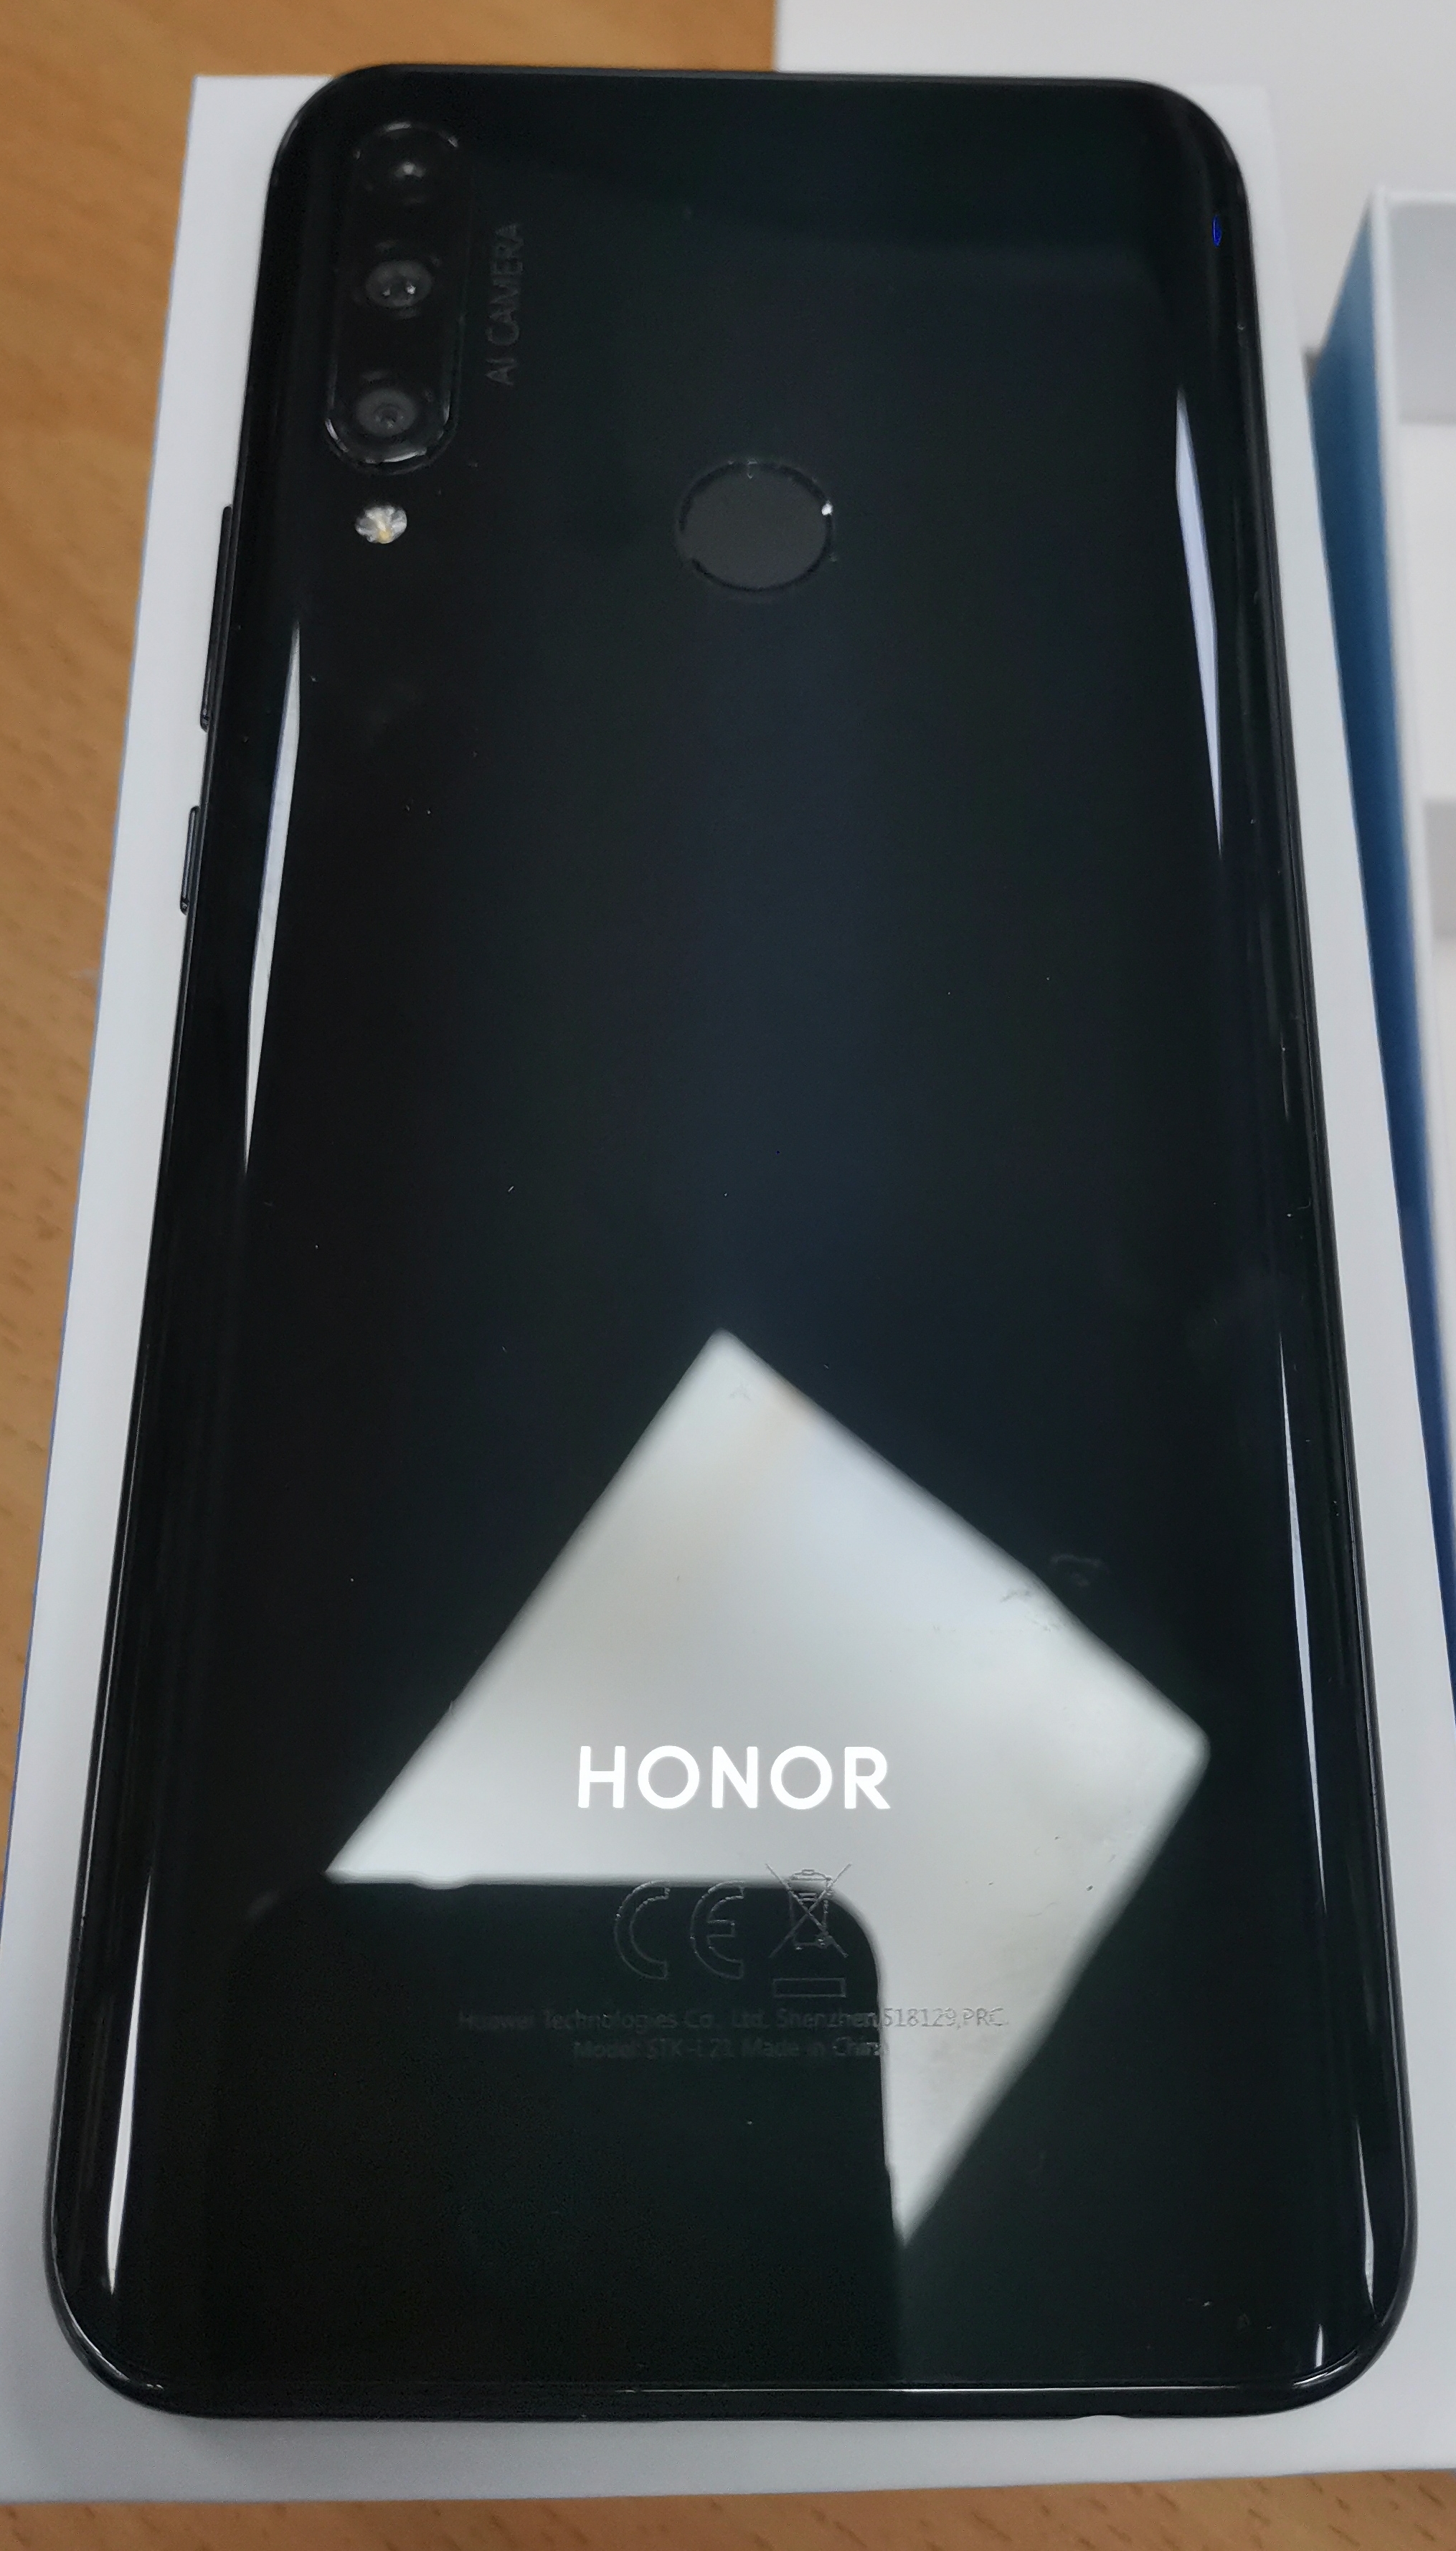 FanReview-Honor-9X-2-week-use-thoughts-and-feelings